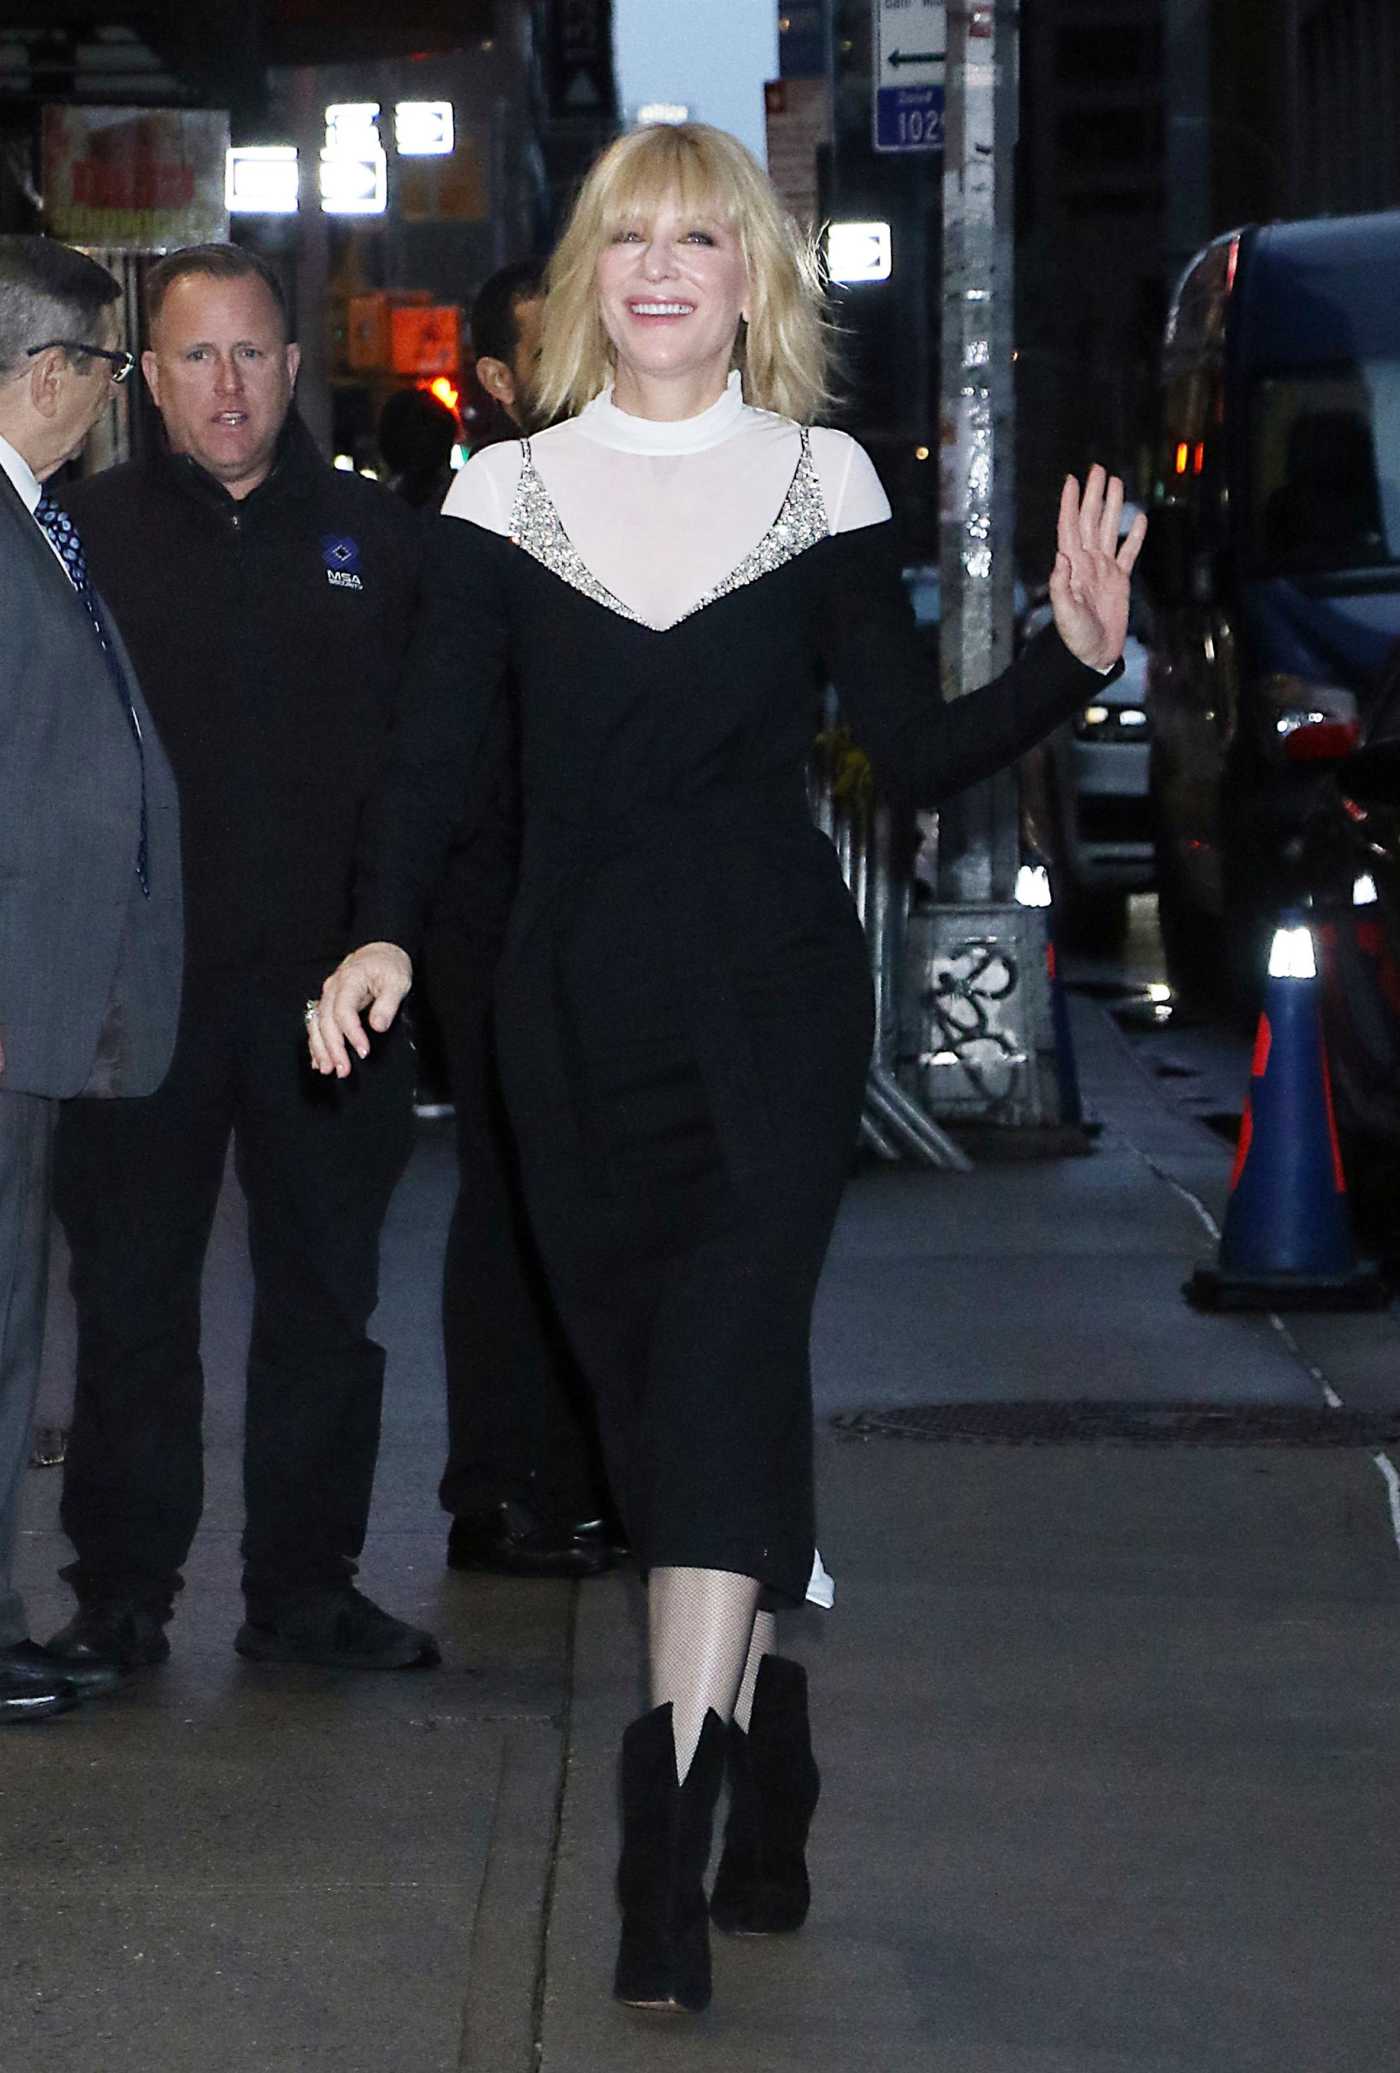 Cate Blanchett in a Black Dress Arrives to Pre-Tape an Appearance at The Late Show with Stephen Colbert in New York 10/04/2022